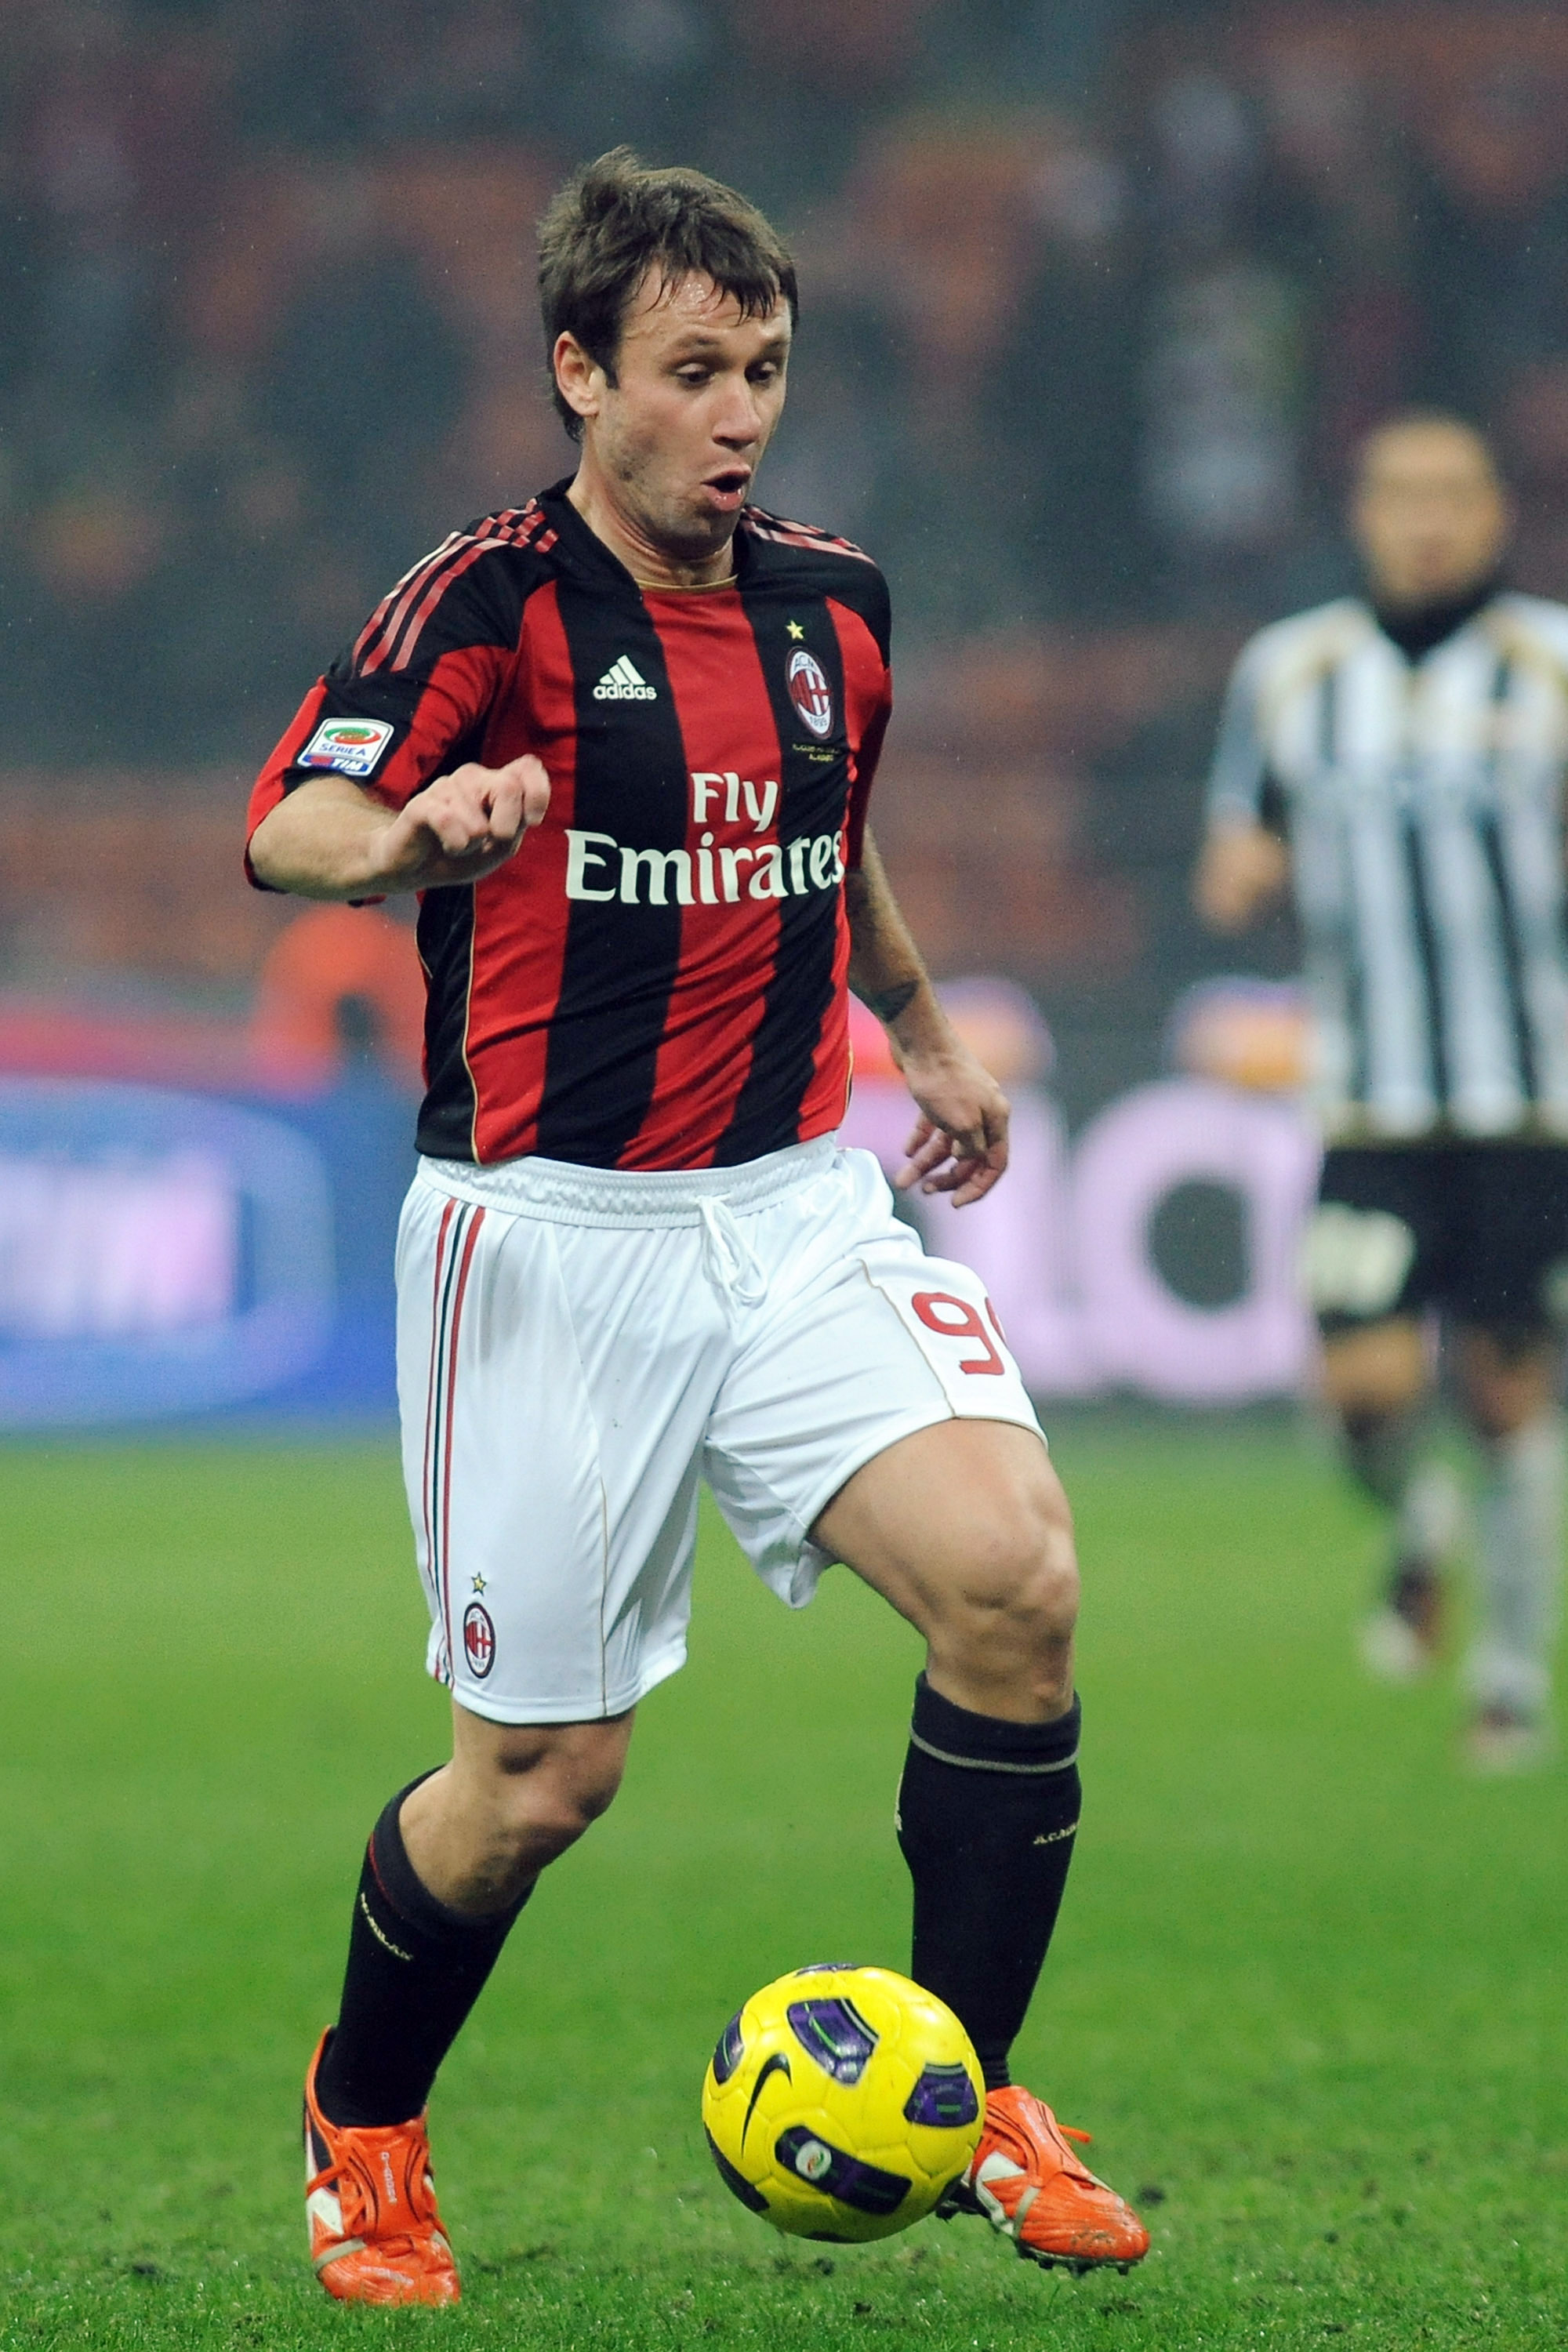 MILAN, ITALY - JANUARY 09:  Antonio Cassano of AC Milan in action during the Serie A match between AC Milan and Udinese Calcio at Stadio Giuseppe Meazza on January 9, 2011 in Milan, Italy.  (Photo by Valerio Pennicino/Getty Images)